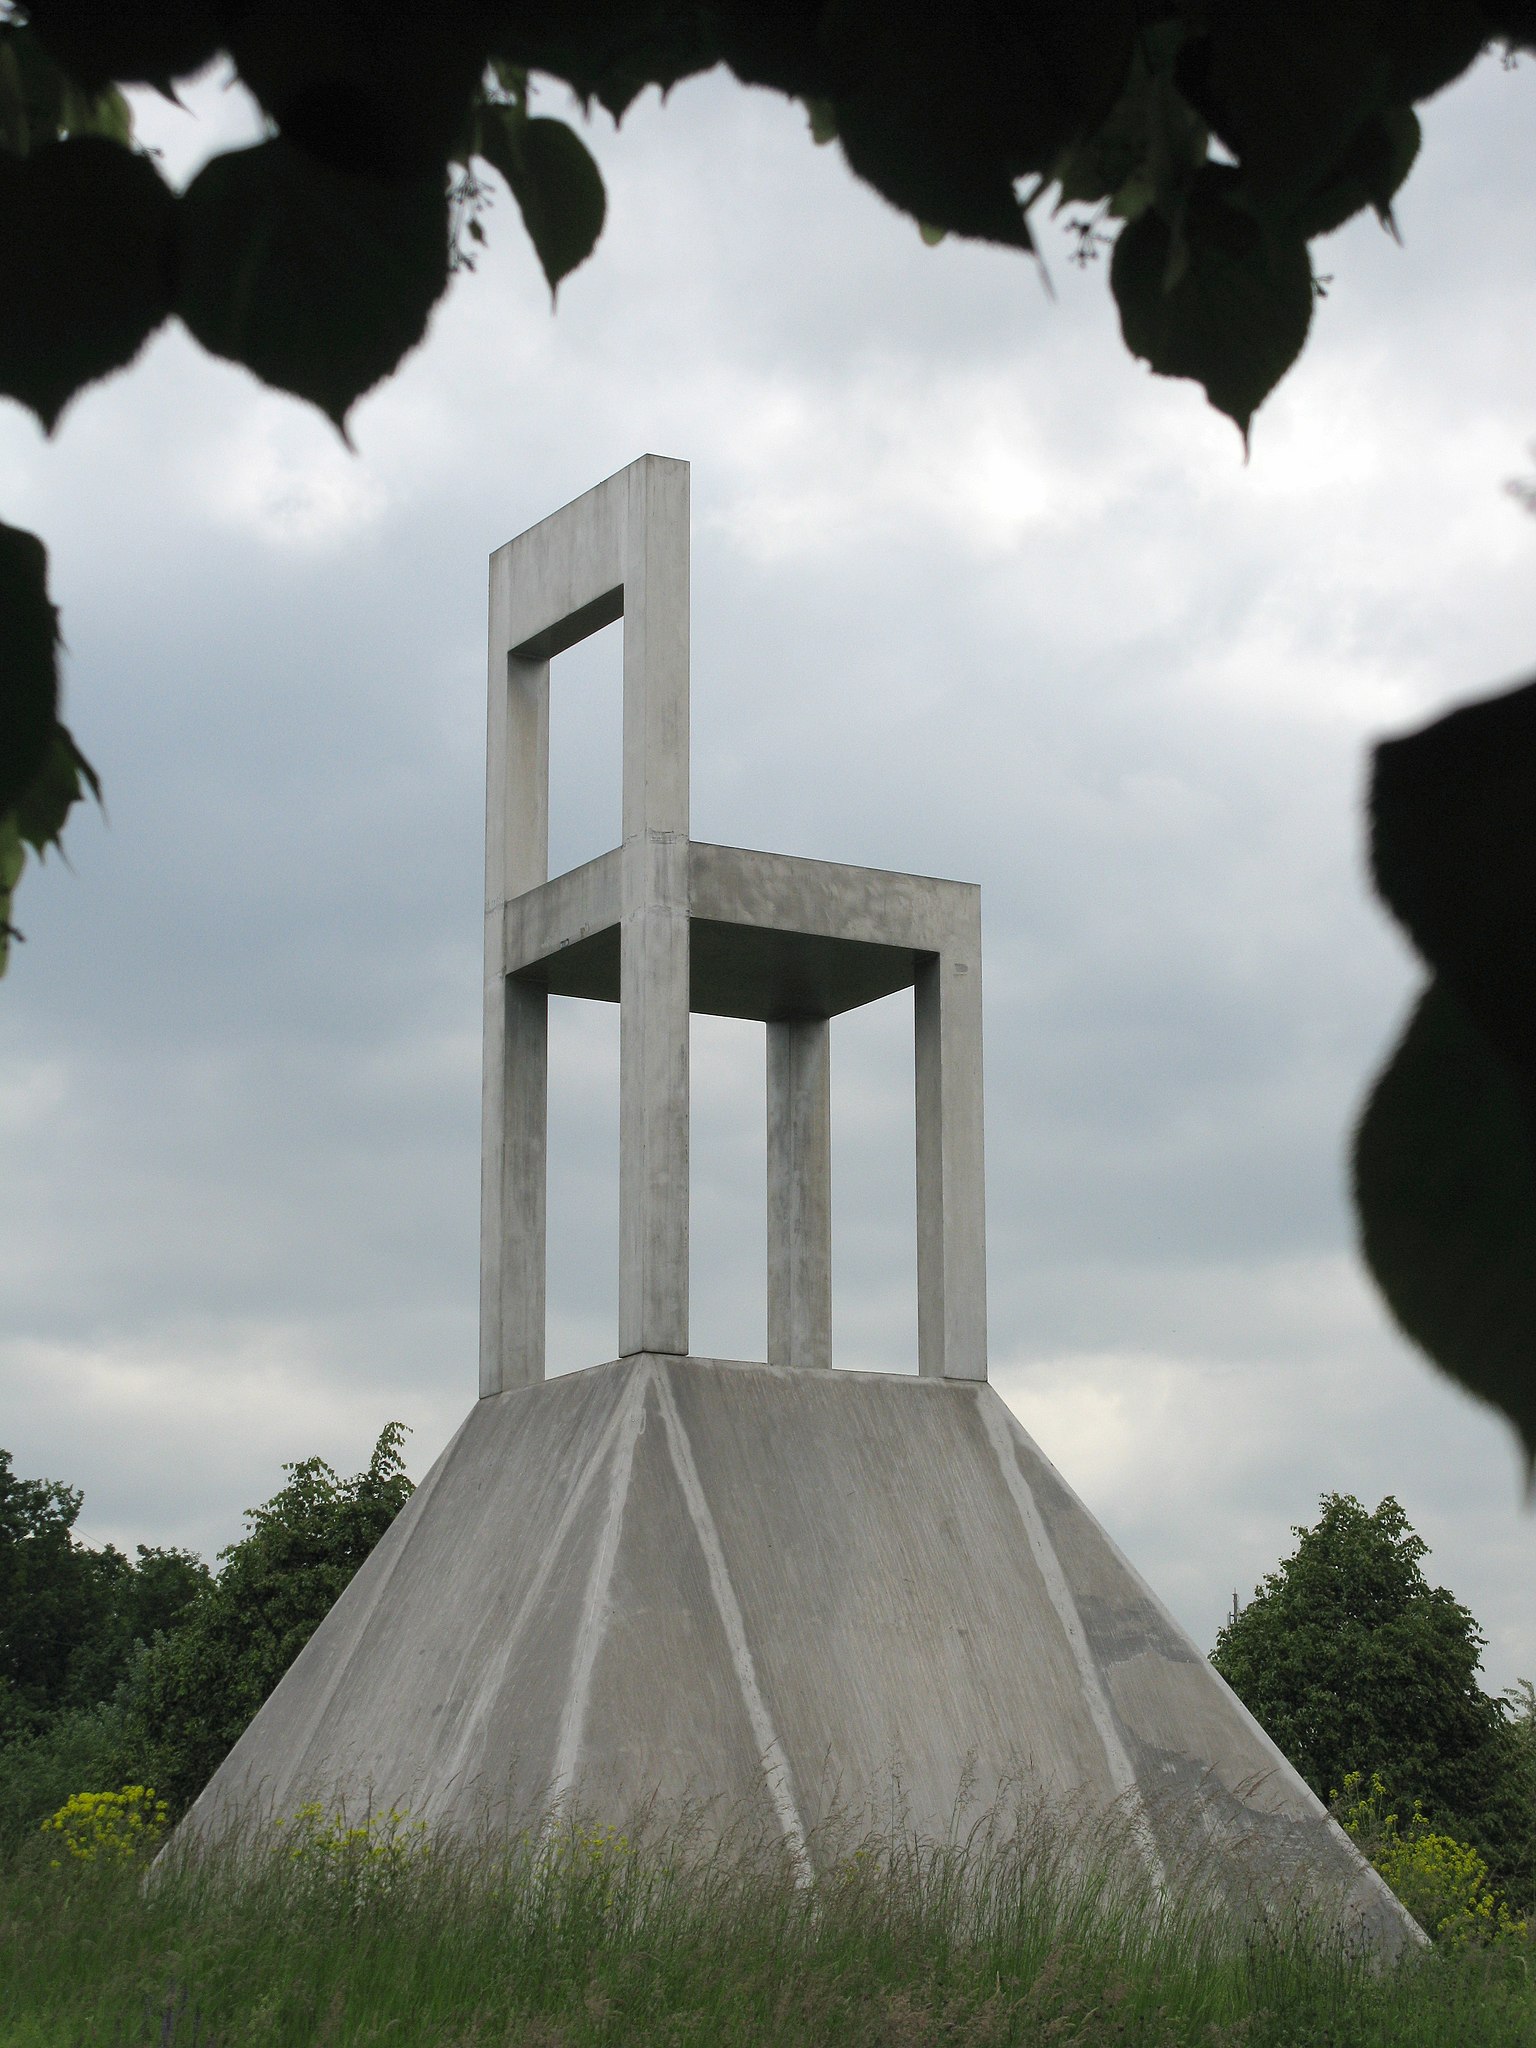 File:Lassù Chair by Alessandro Mendini (Monument in Weil am Rhein,  Germany).jpg - Wikimedia Commons